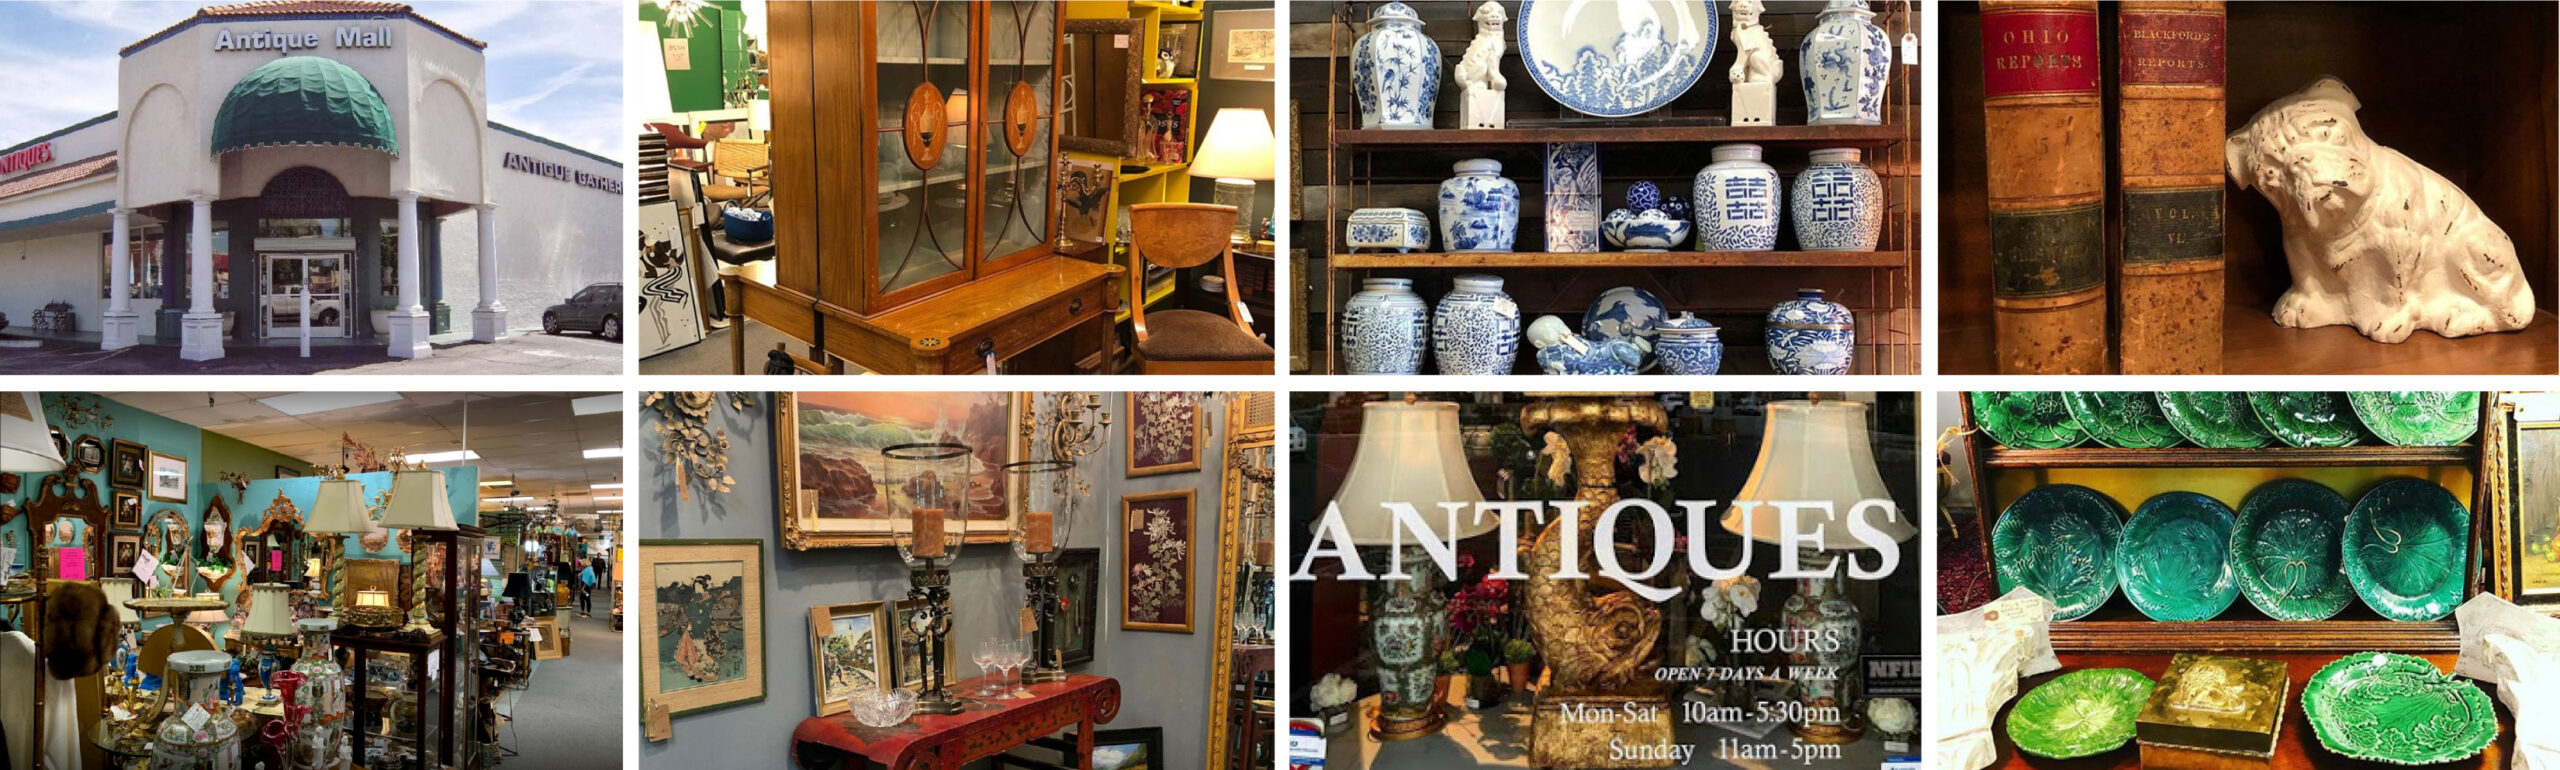 Antique Gatherings is one of the best!